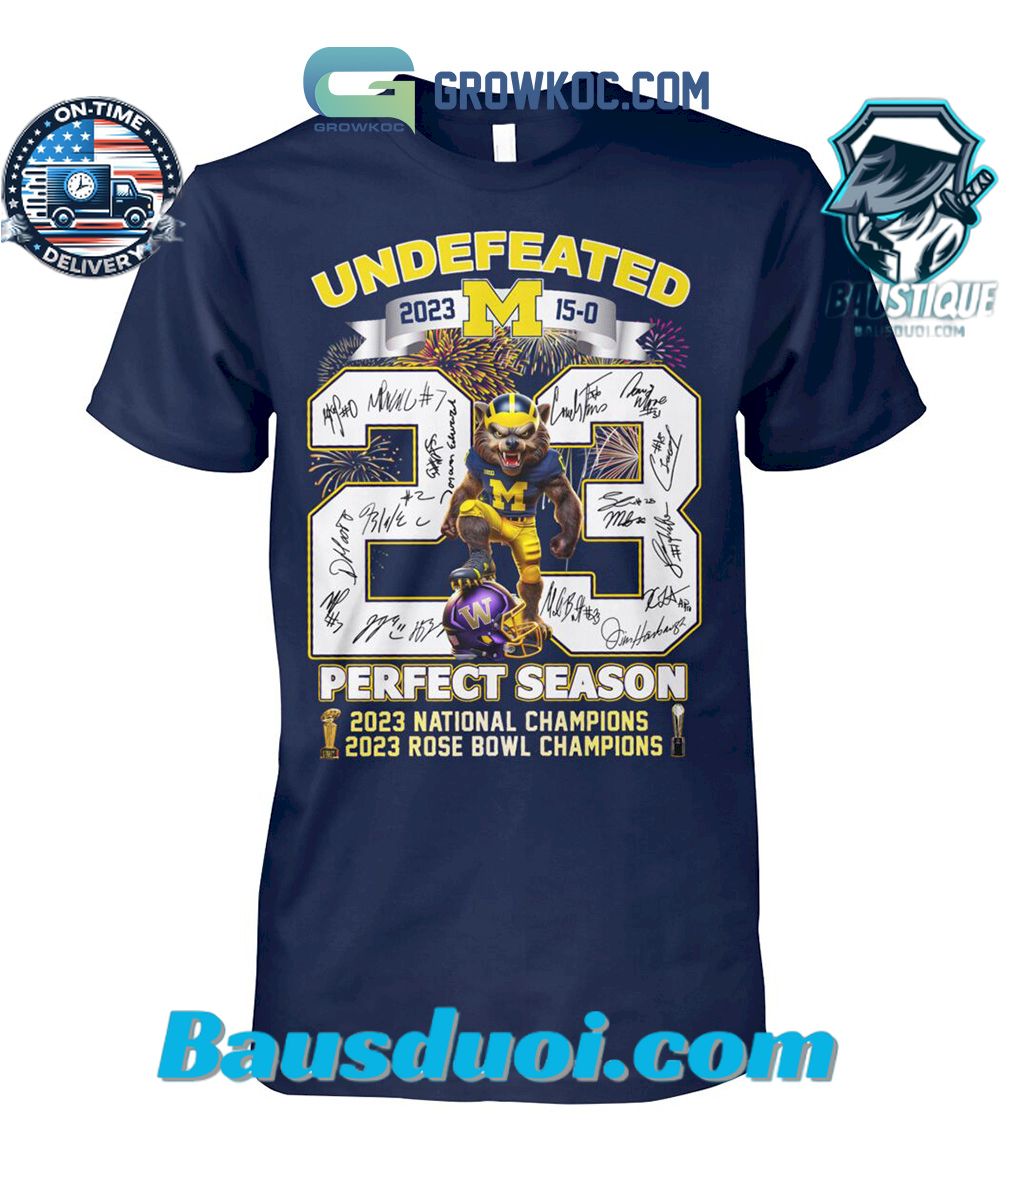 Michigan Wolverines Undefeated 2023 Perfect Season T Shirt1